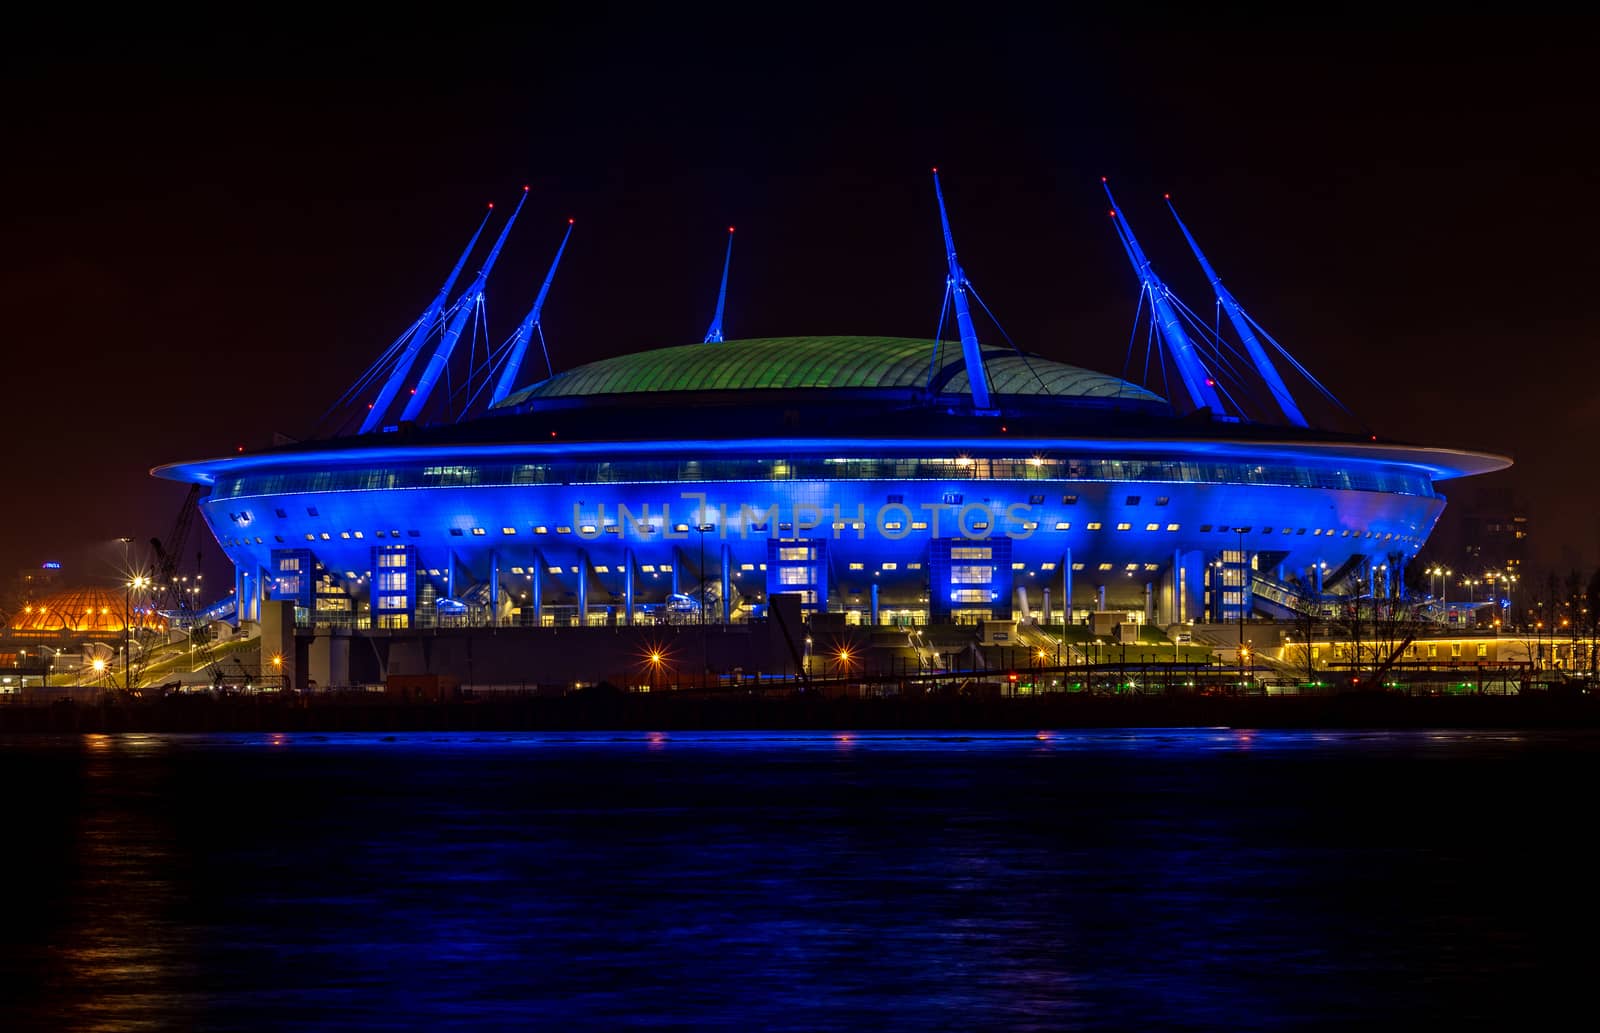 April 17, 2018. Russia. Stadium St. Petersburg arena (Gazprom arena), which will host the matches of the European football Championship in 2020 and the final of the Champions League in 2021